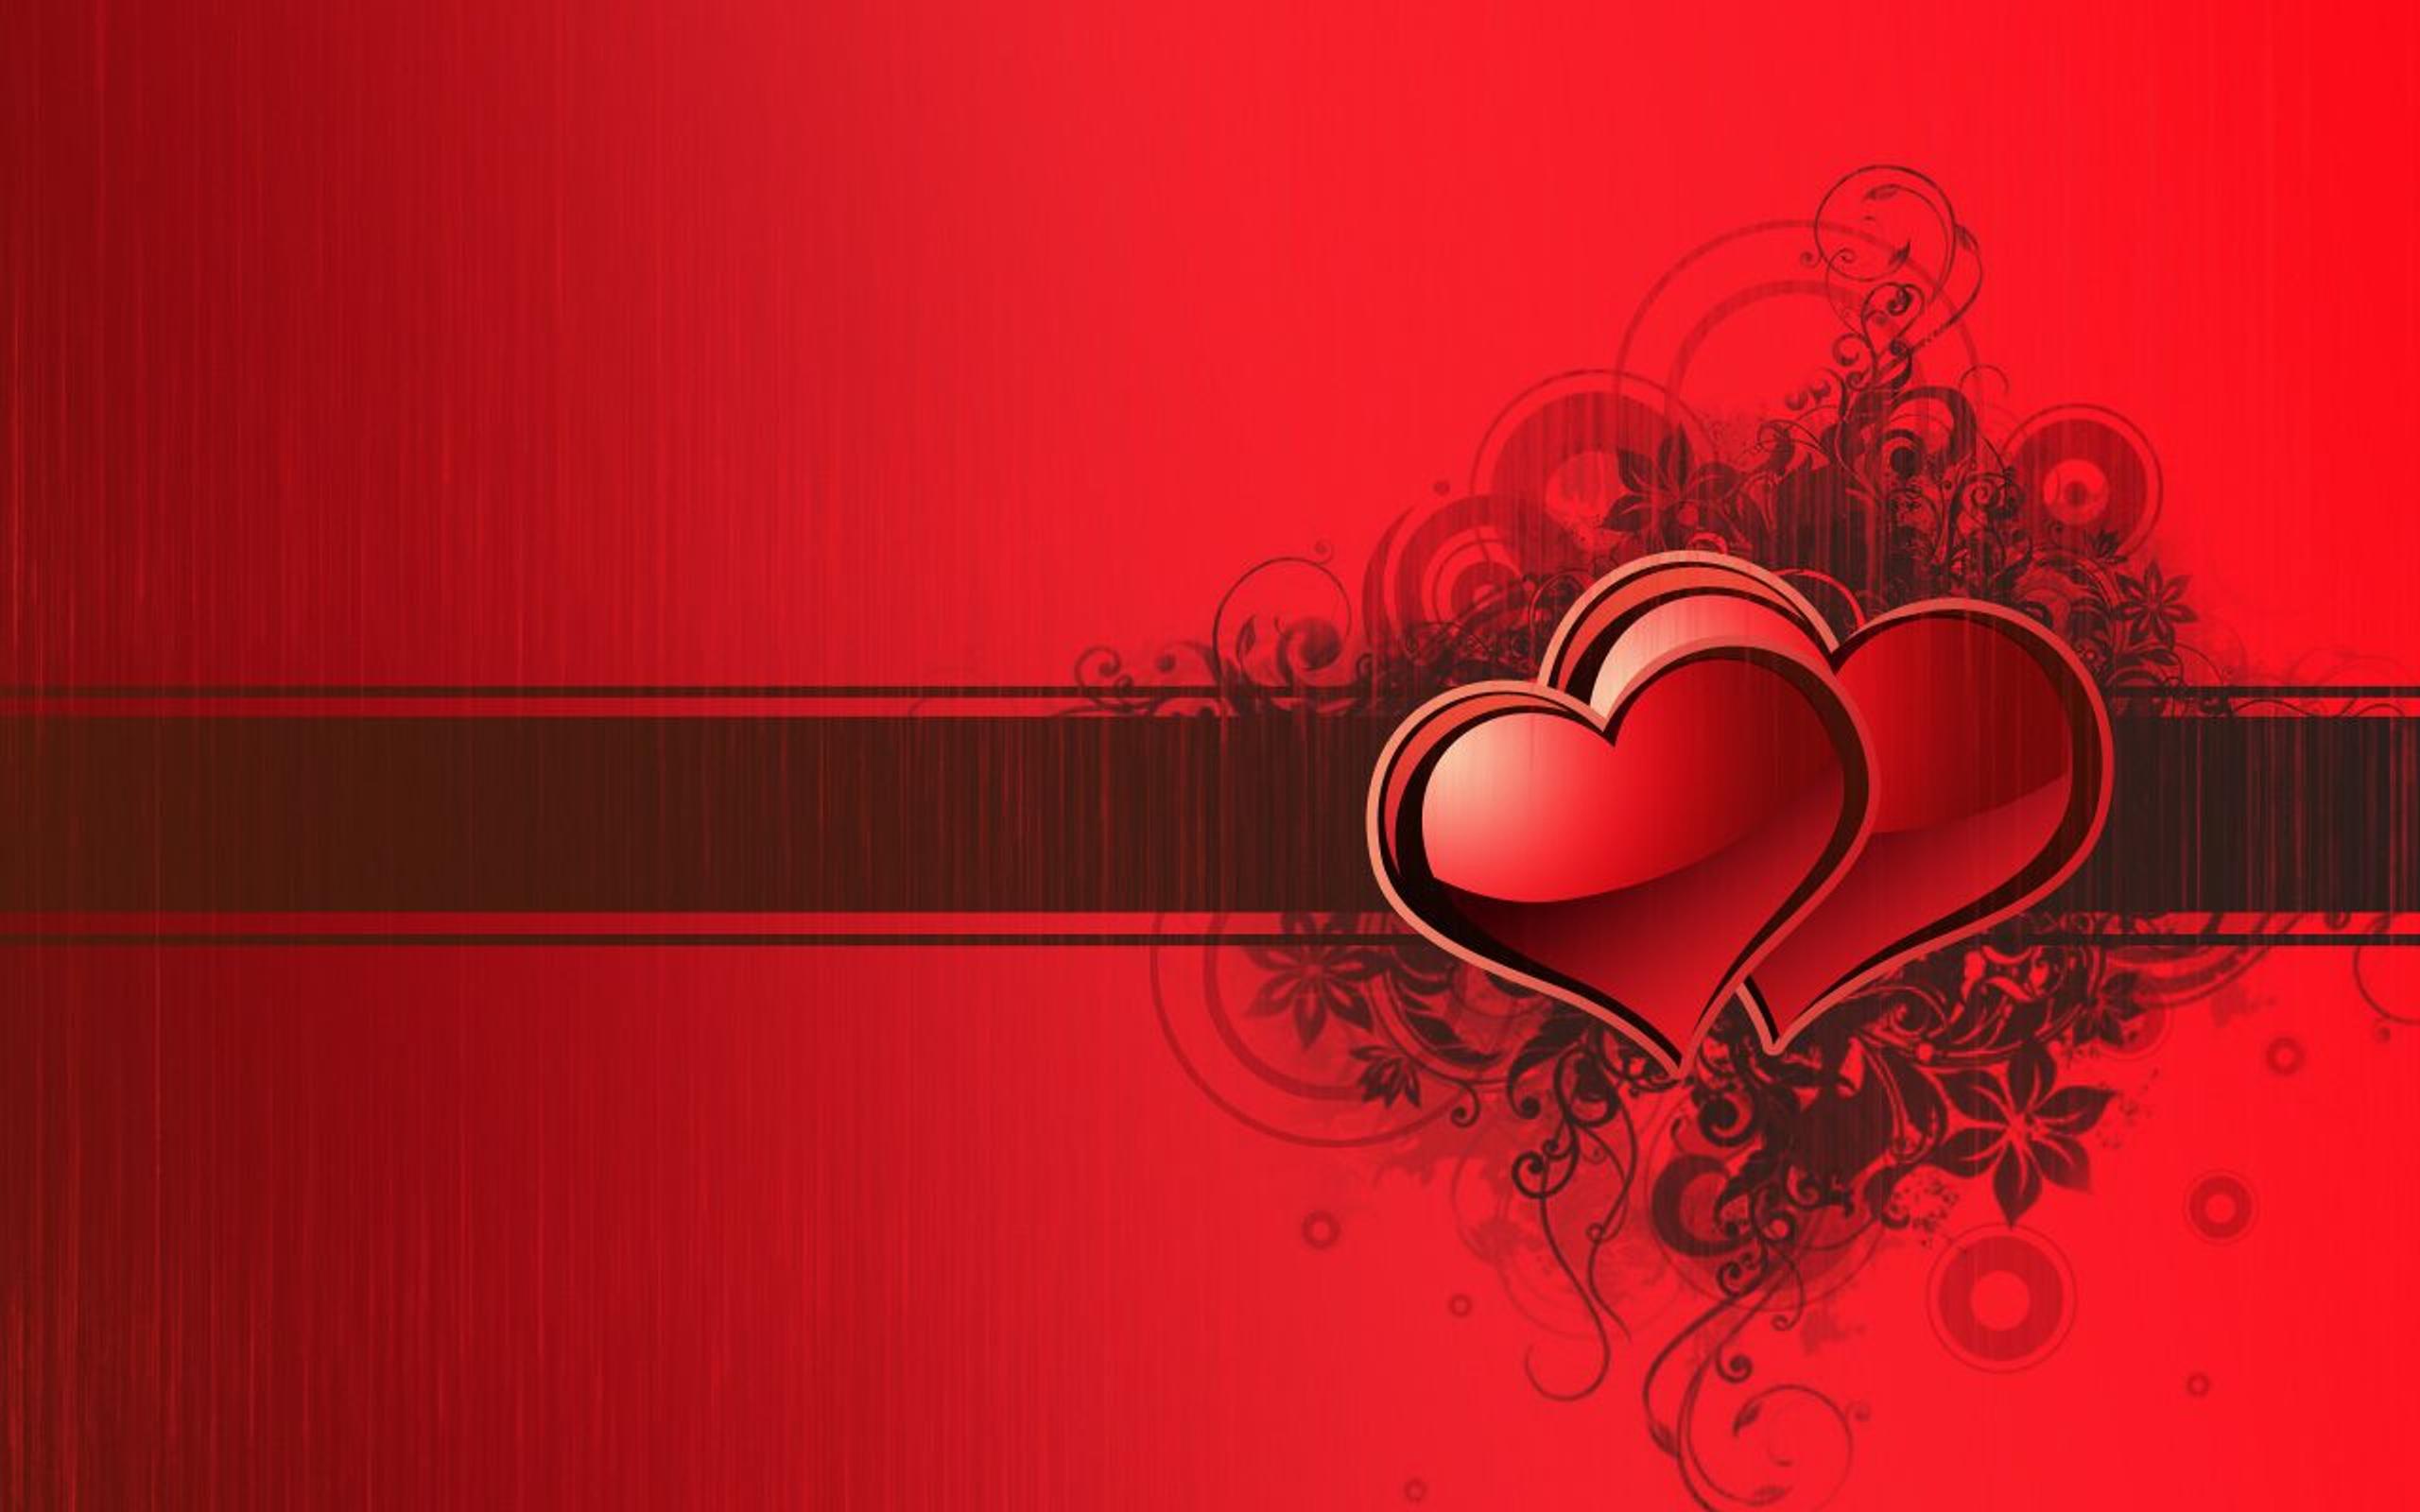 Two red hearts in one - Wonderful red wallpaper - Love time